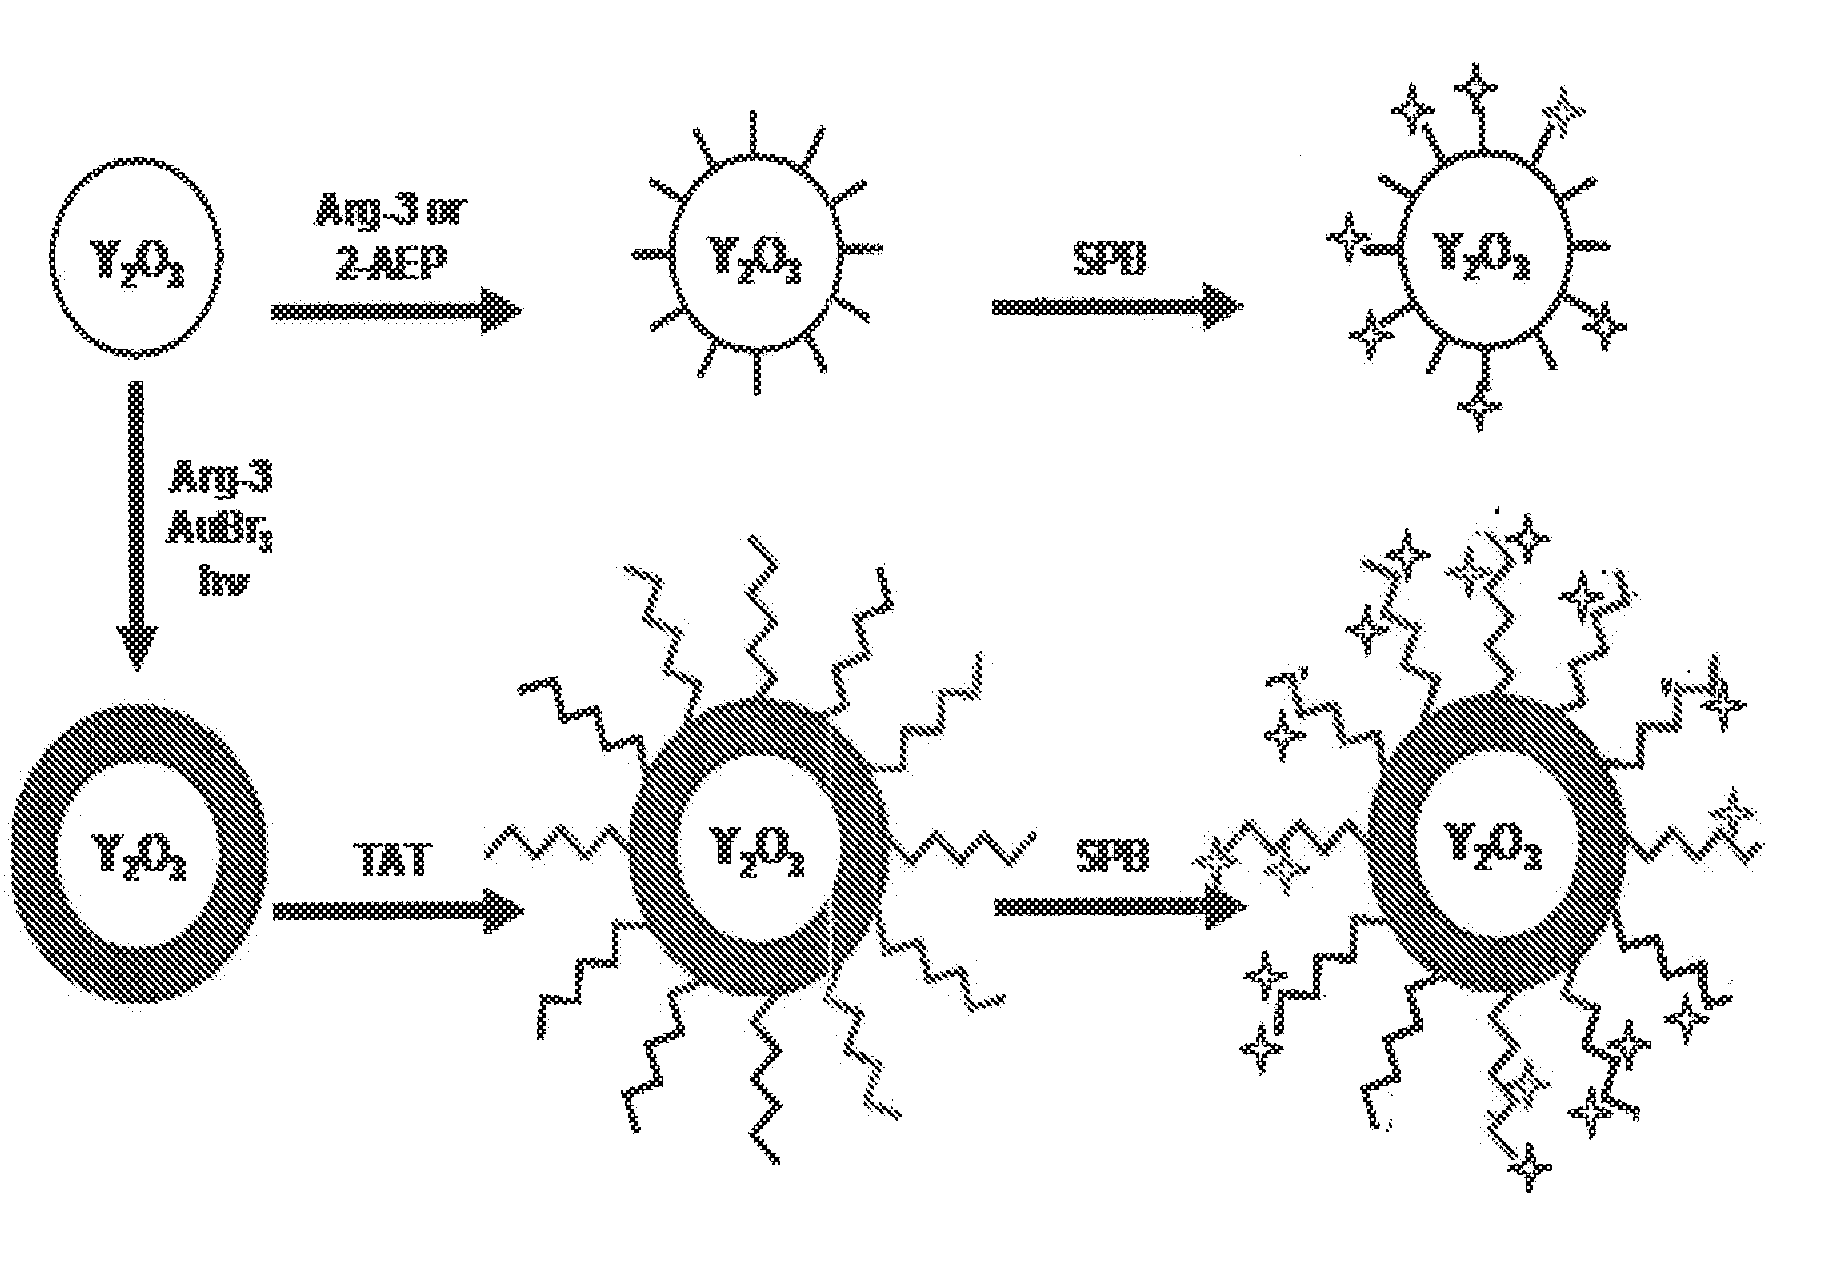 Functionalized metal-coated energy converting nanoparticles, methods for production thereof and methods for use